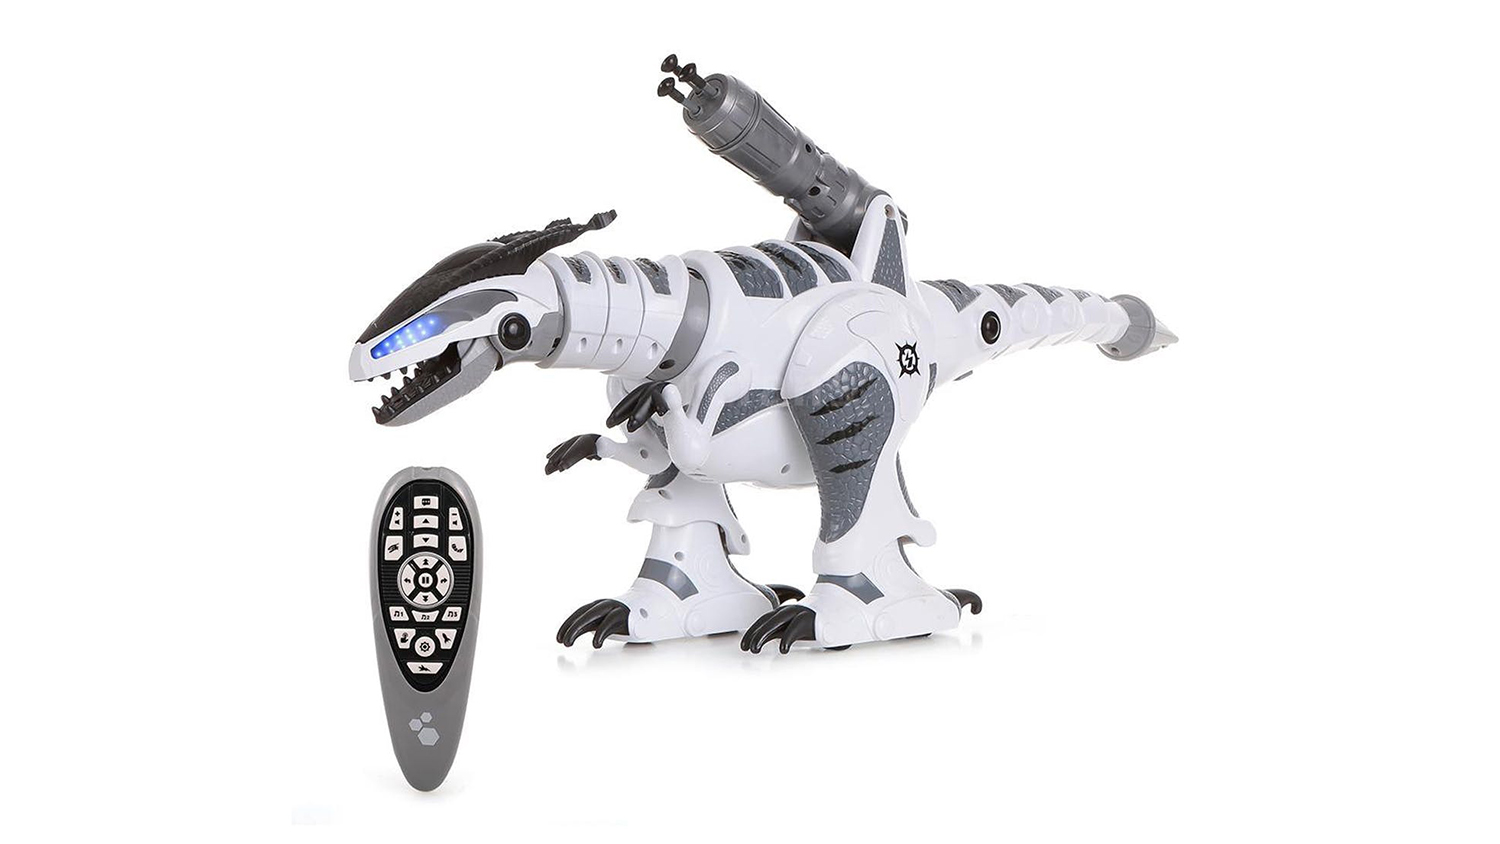 black and white robot with remote